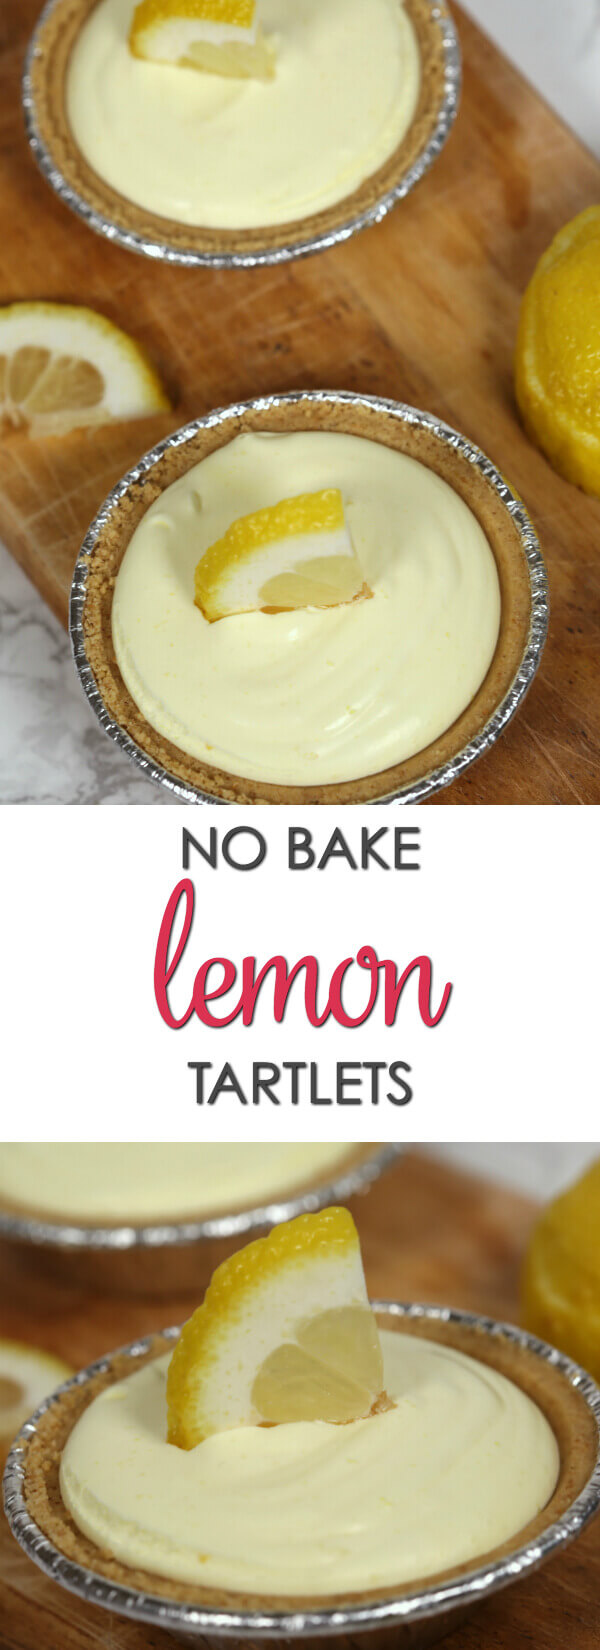 No Bake Lemon Tartlets - these easy tarts are one of my favorite no bake desserts 